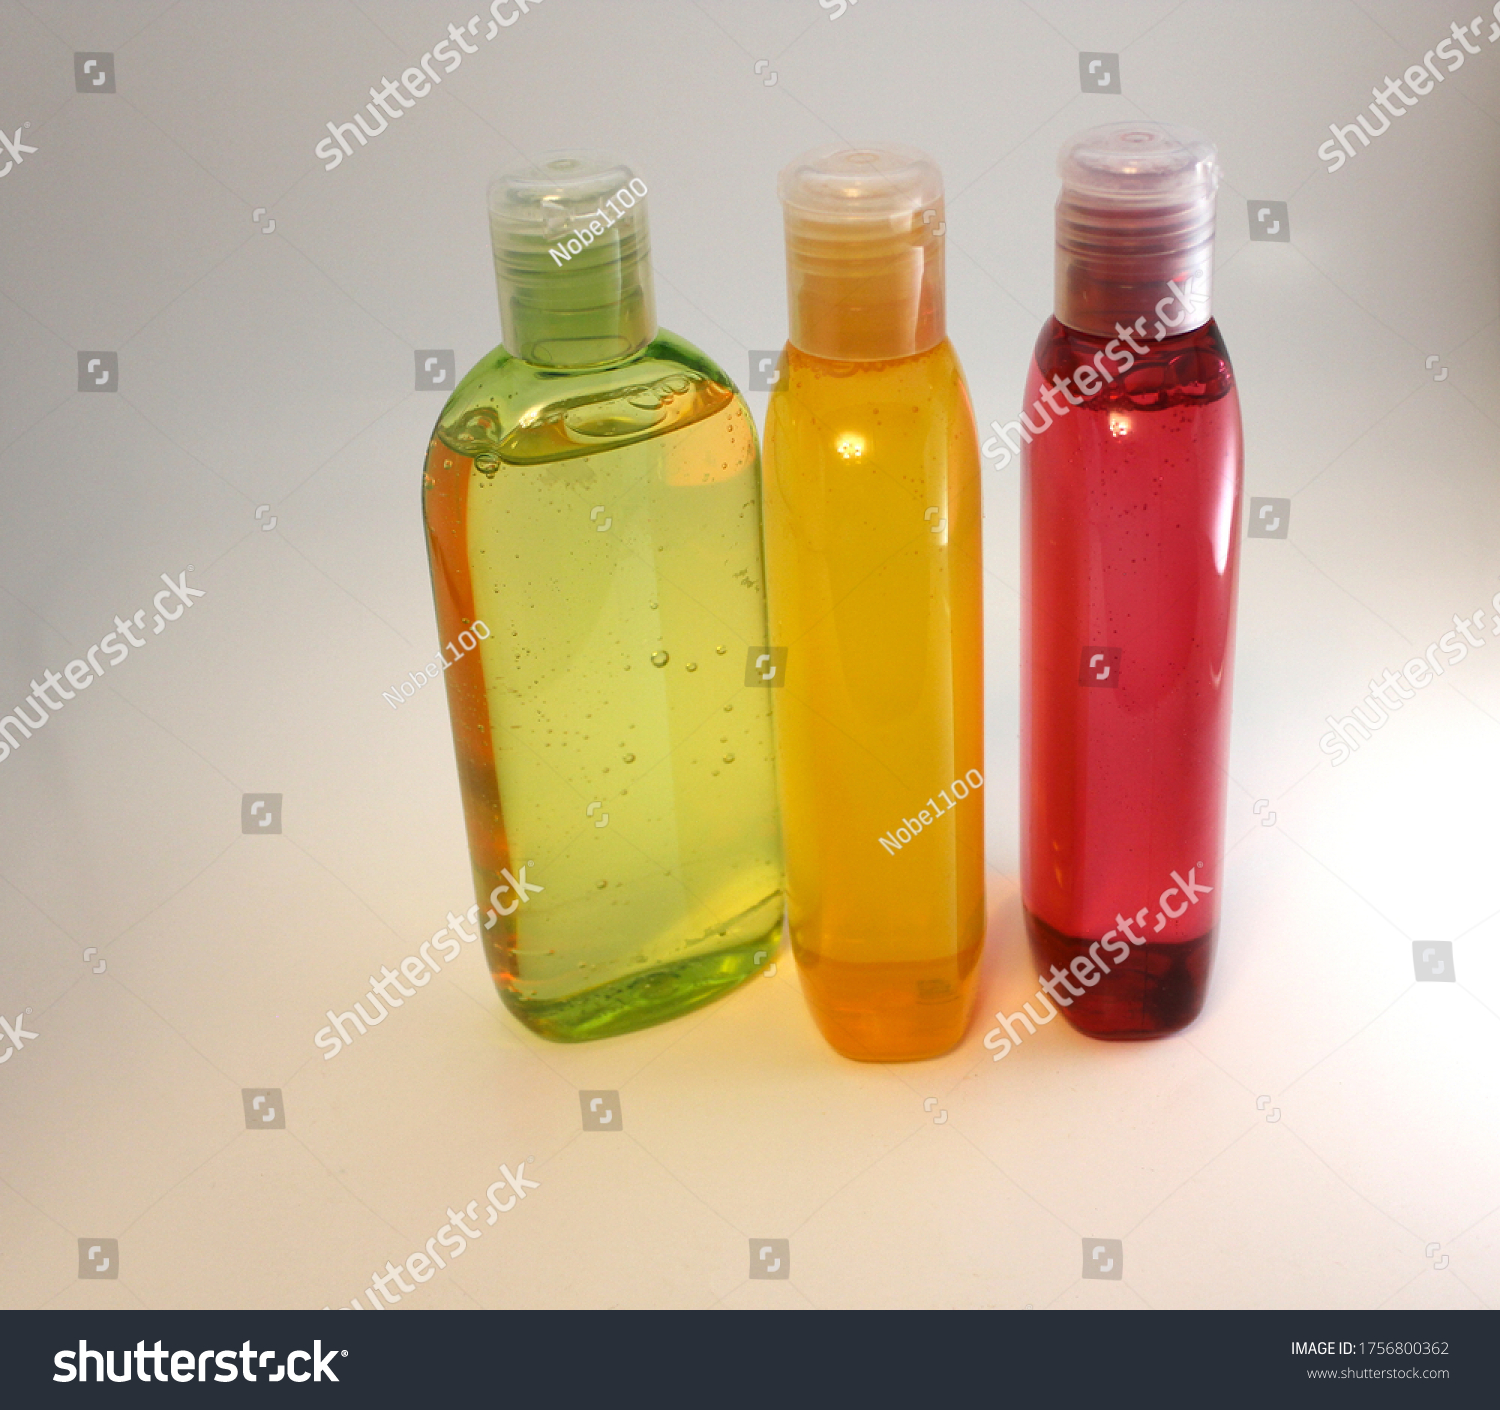 Download Shampoo Bottle Colorful Green Red Yellow Beauty Fashion Stock Image 1756800362 Yellowimages Mockups